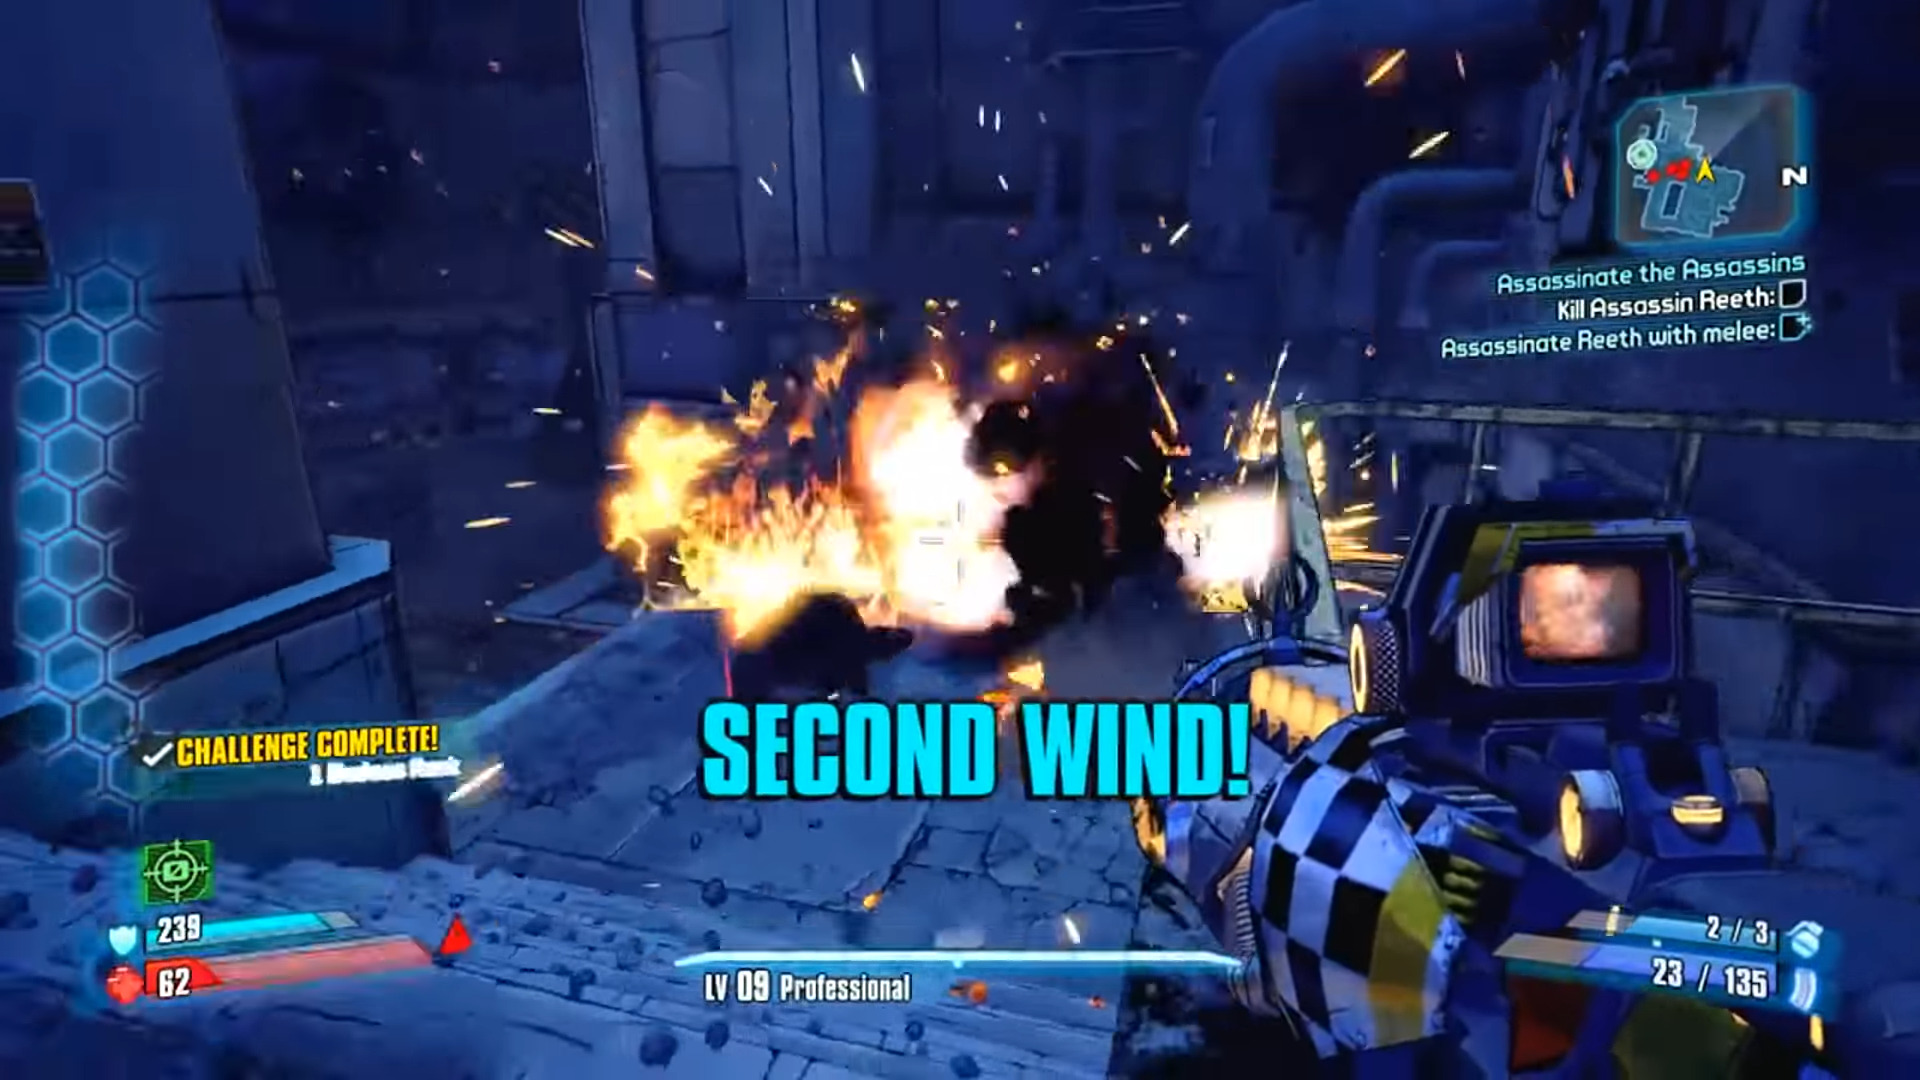 What is the point of Borderlands 2?